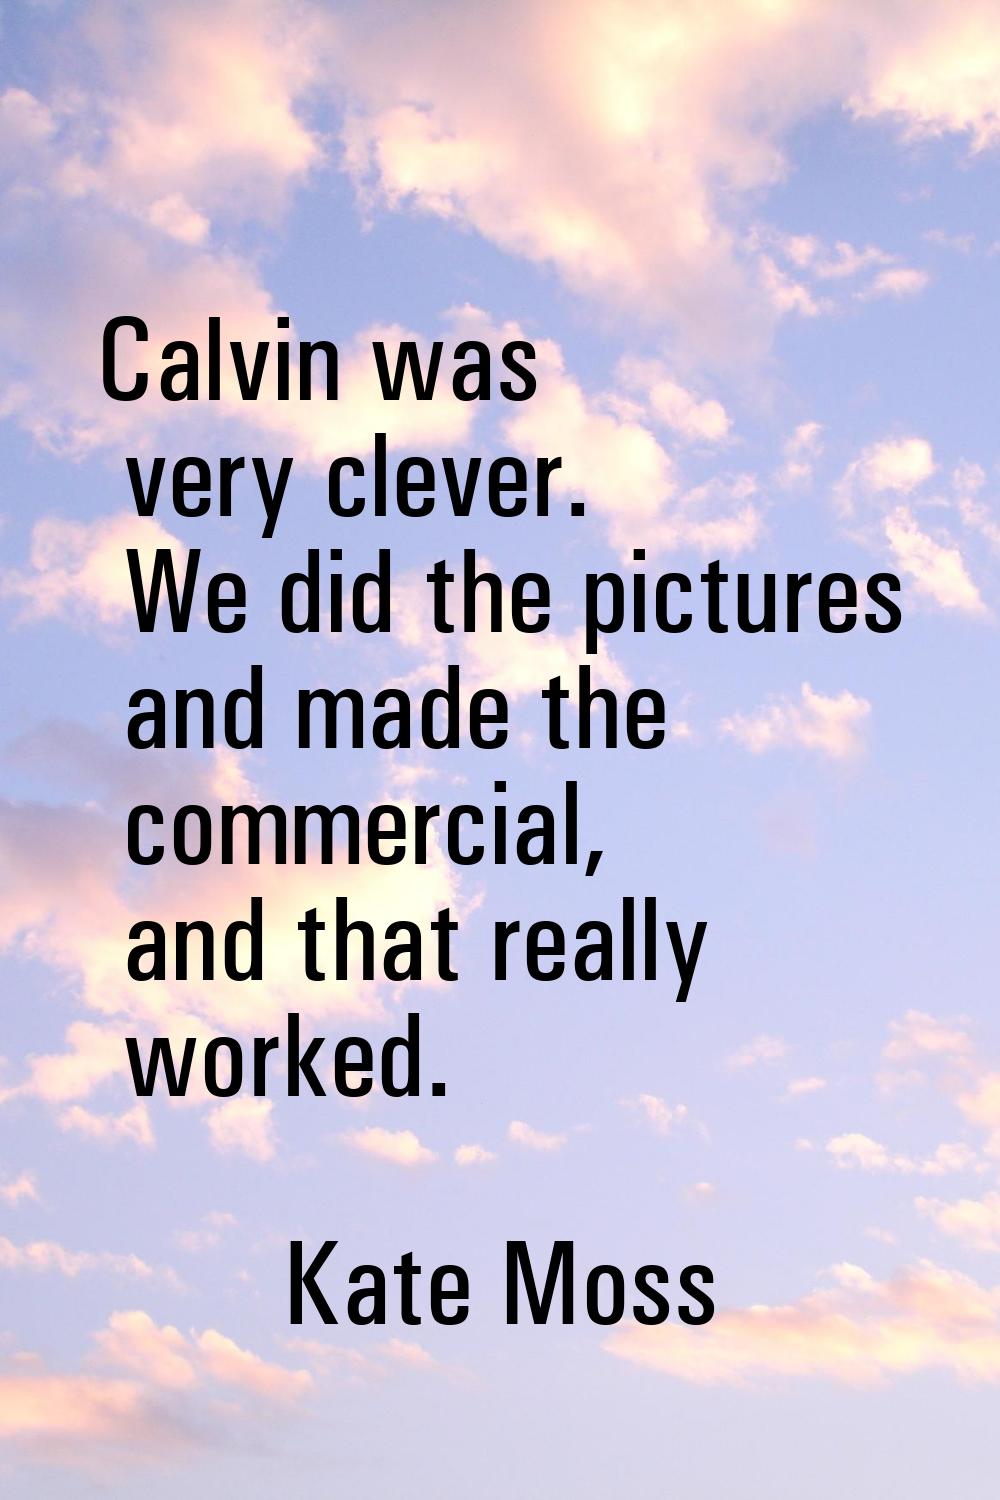 Calvin was very clever. We did the pictures and made the commercial, and that really worked.